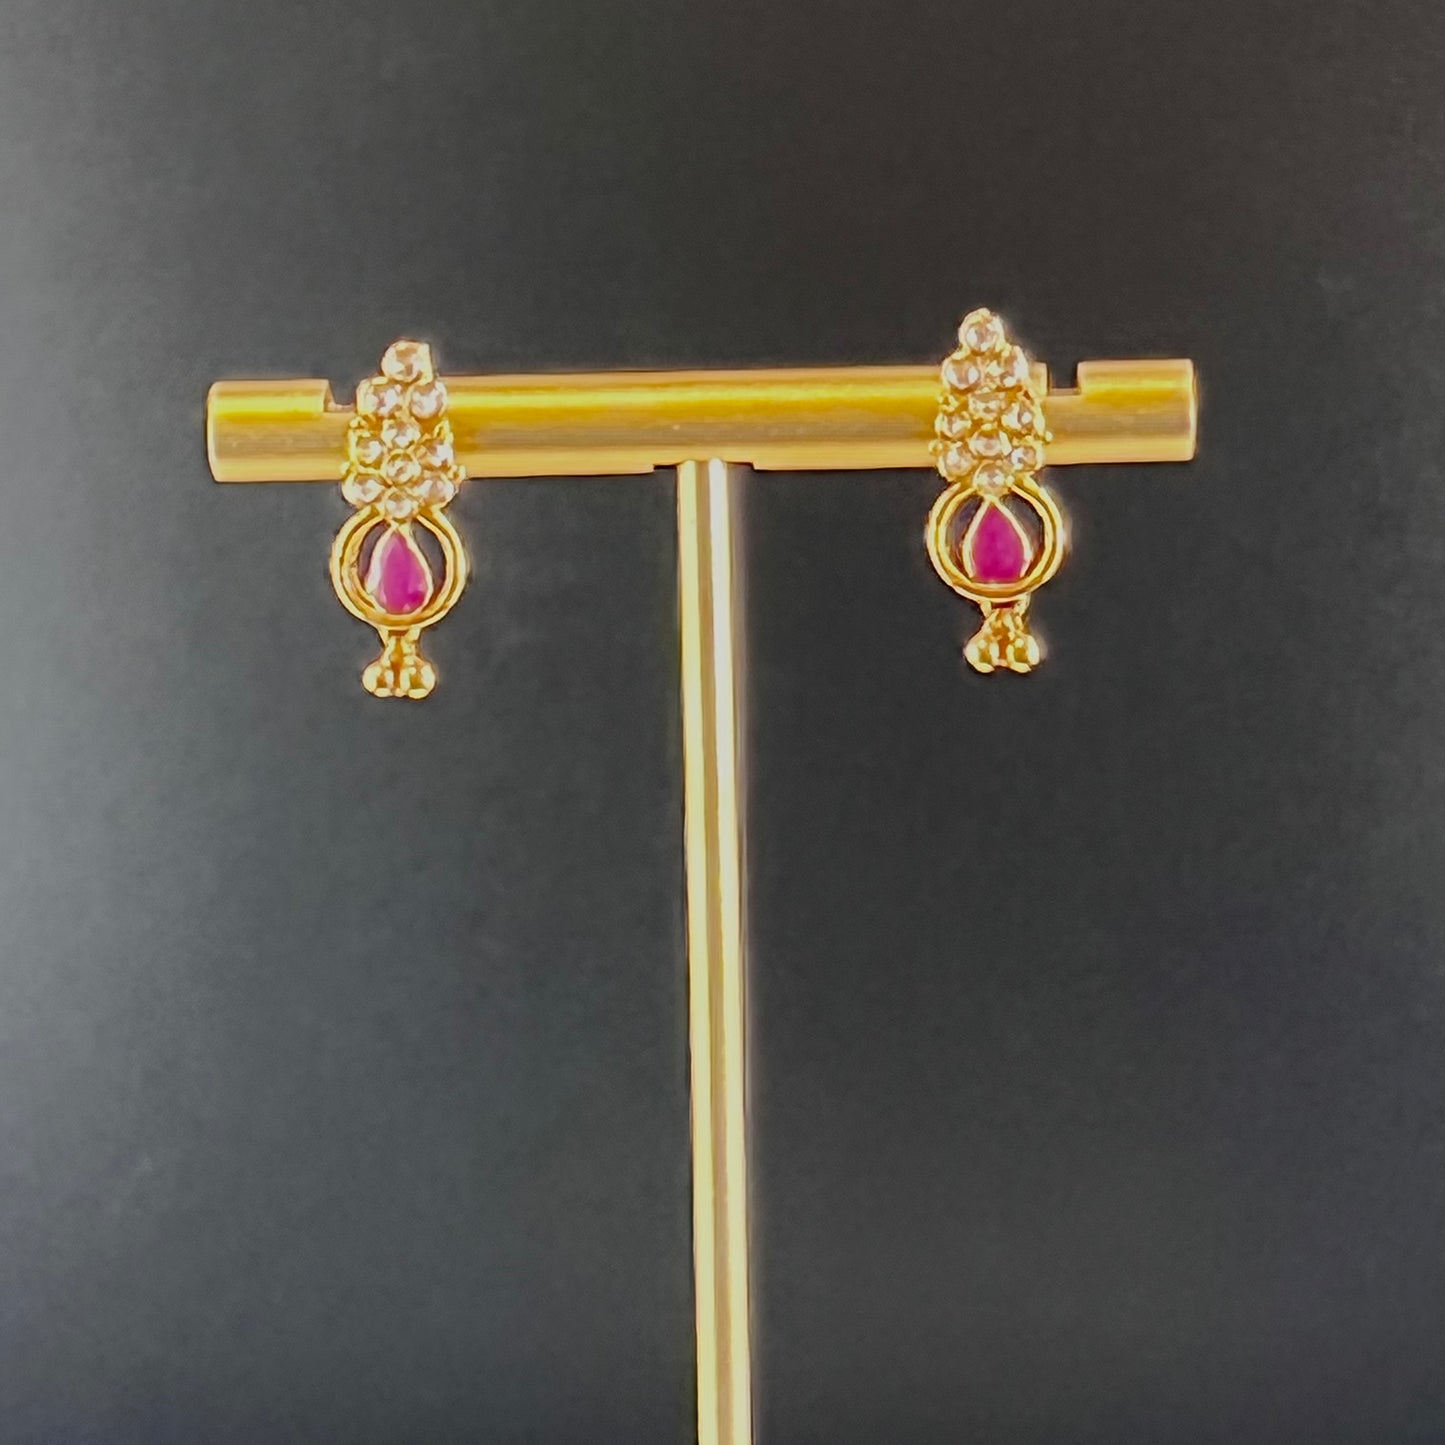 Vibrant Cubic Zarconia & Gold Choker Set with Faint Emeralds and Rubies